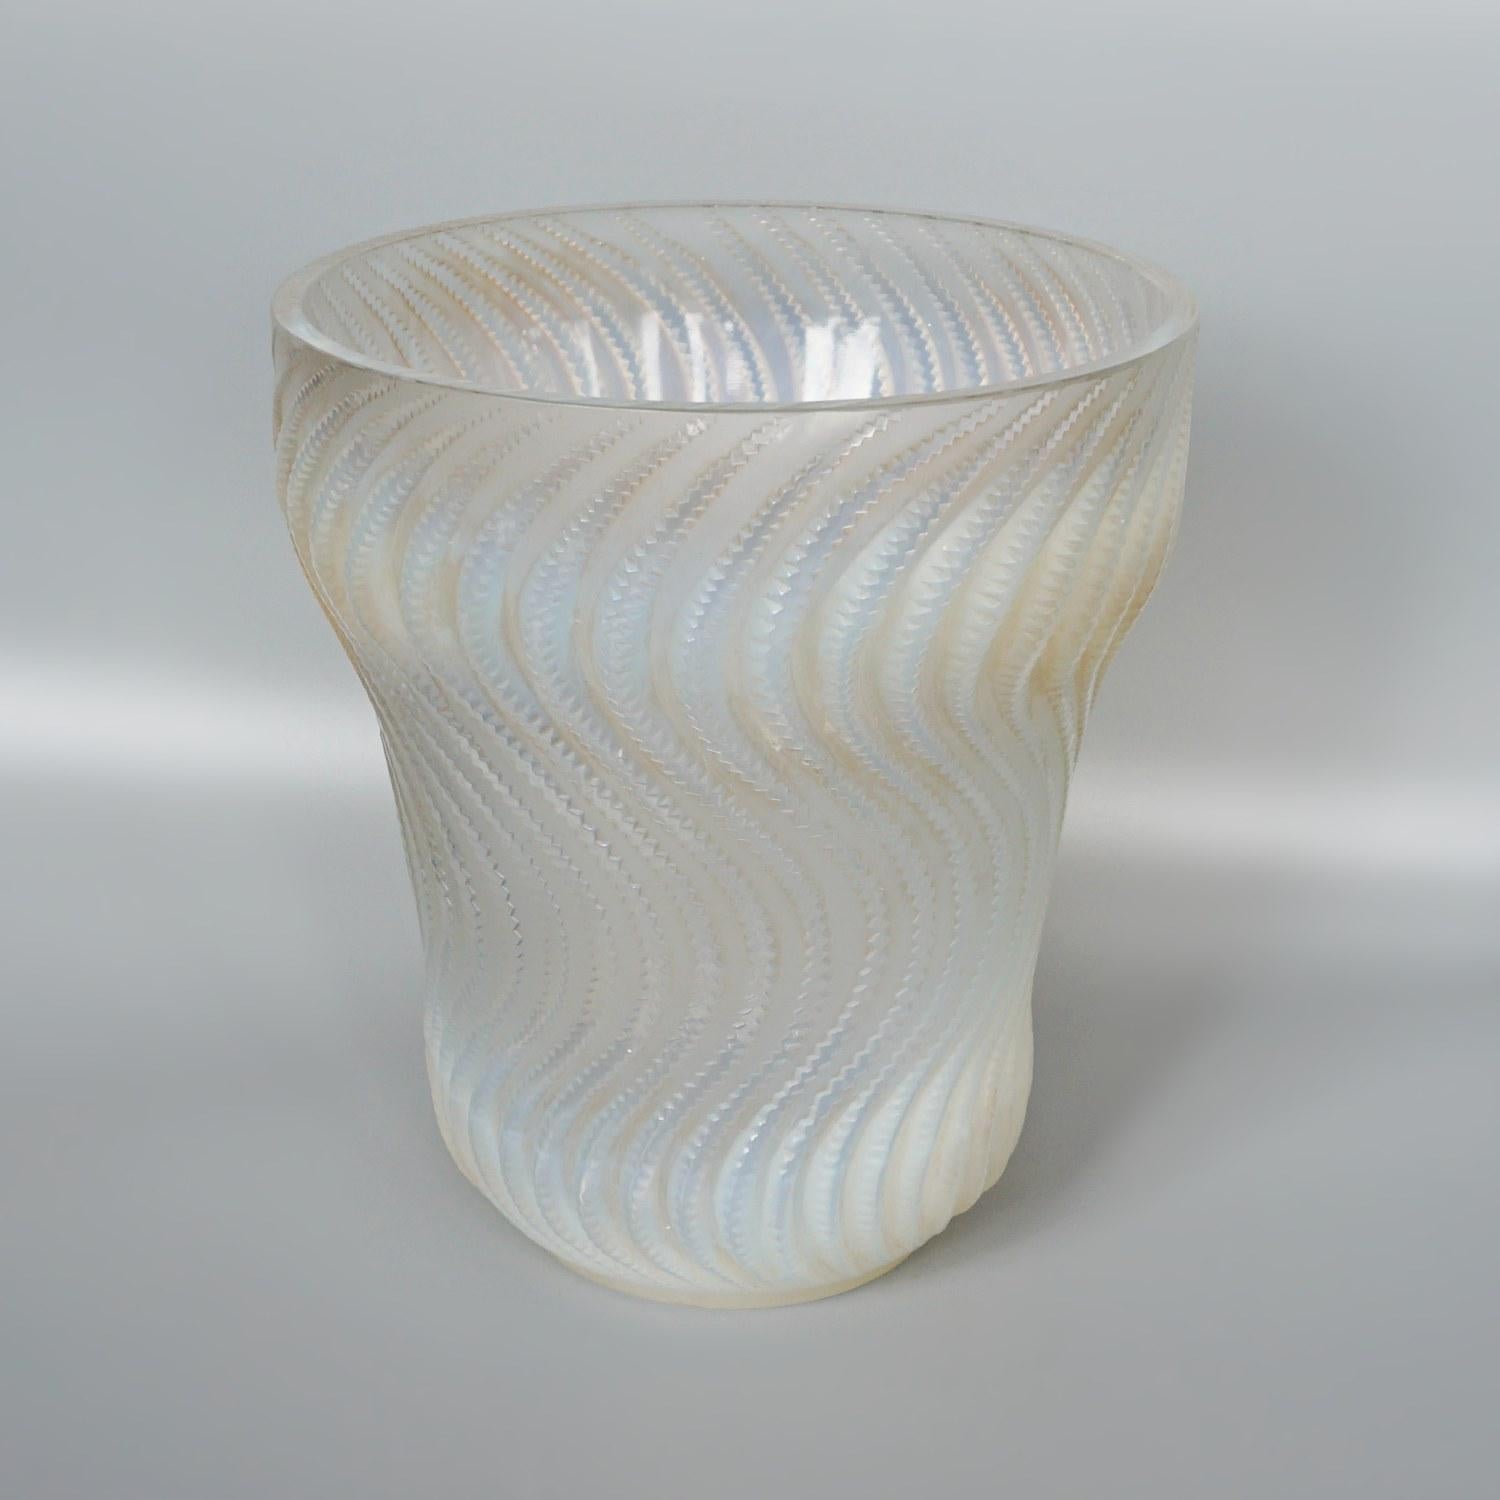 'Actinia' an Opalescent Glass Vase by René Lalique, Circa 1935 For Sale 2